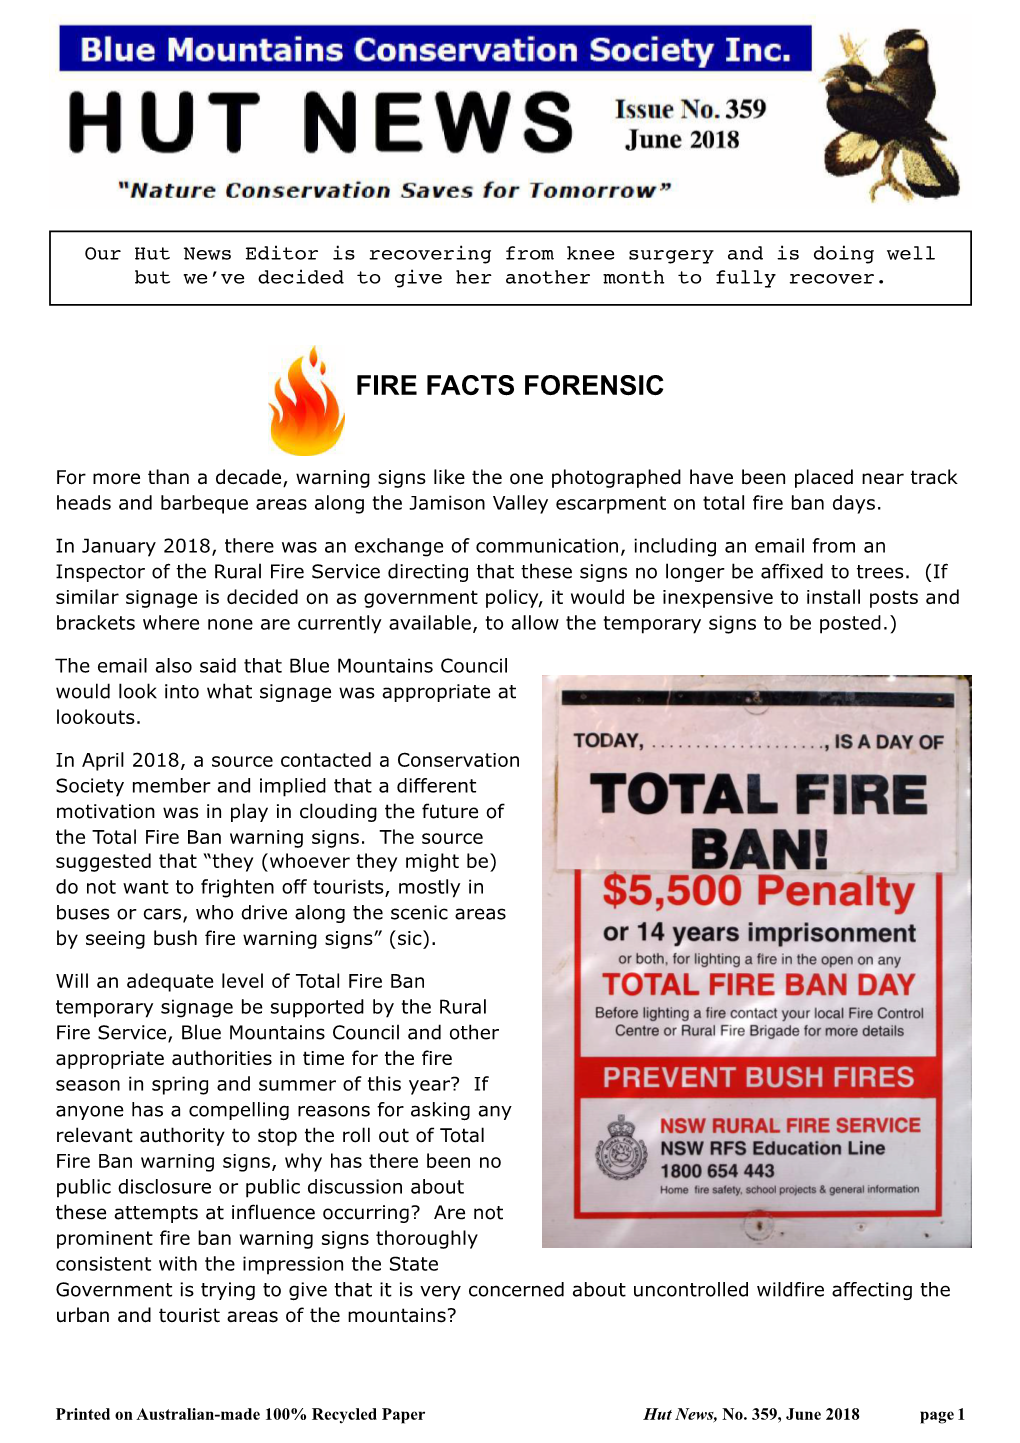 Fire Facts Forensic